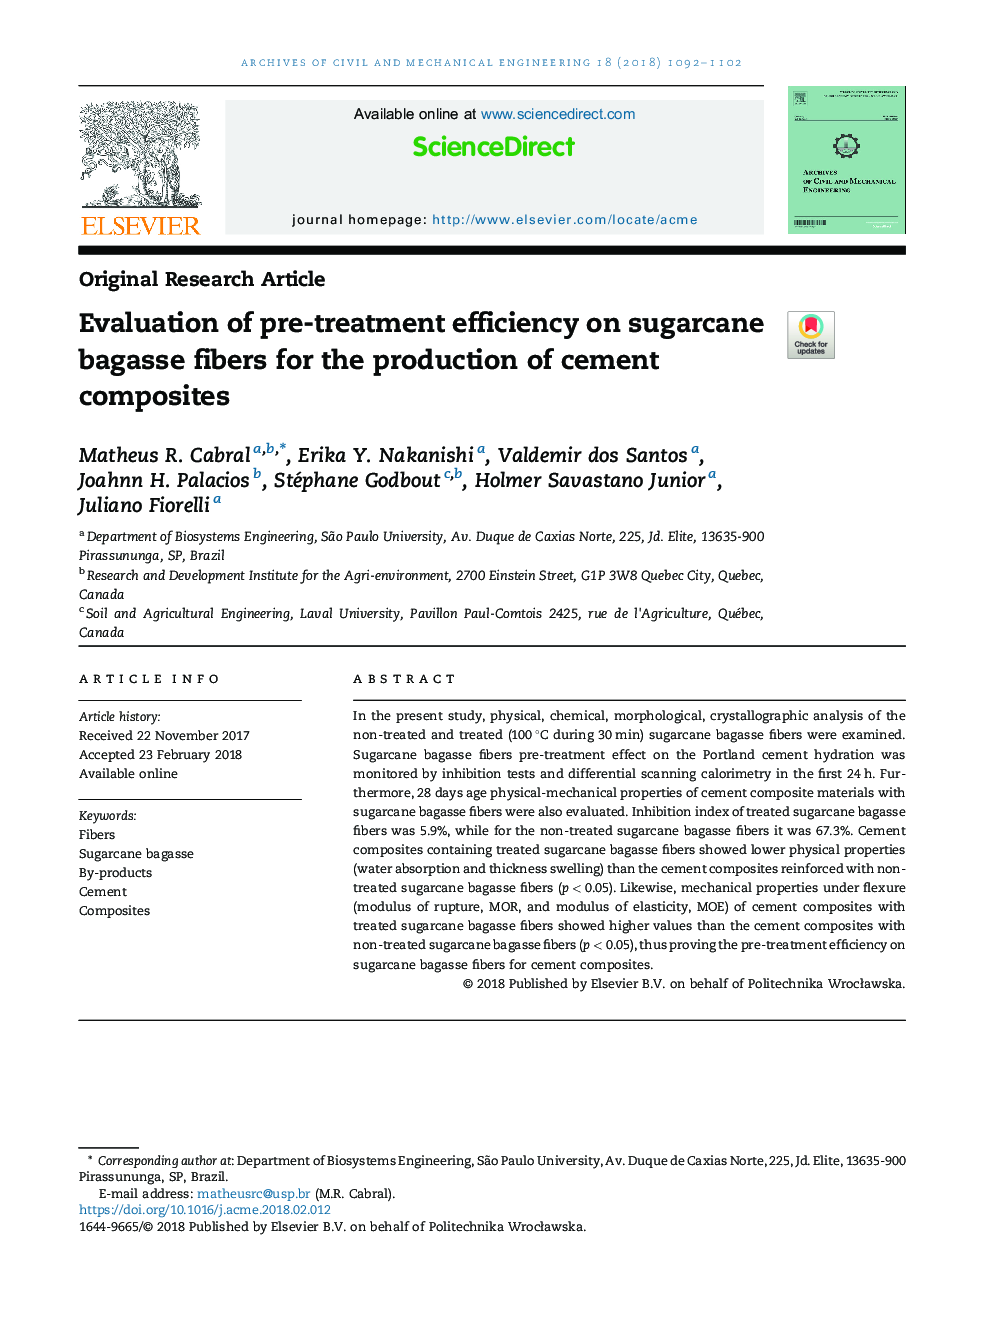 Evaluation of pre-treatment efficiency on sugarcane bagasse fibers for the production of cement composites